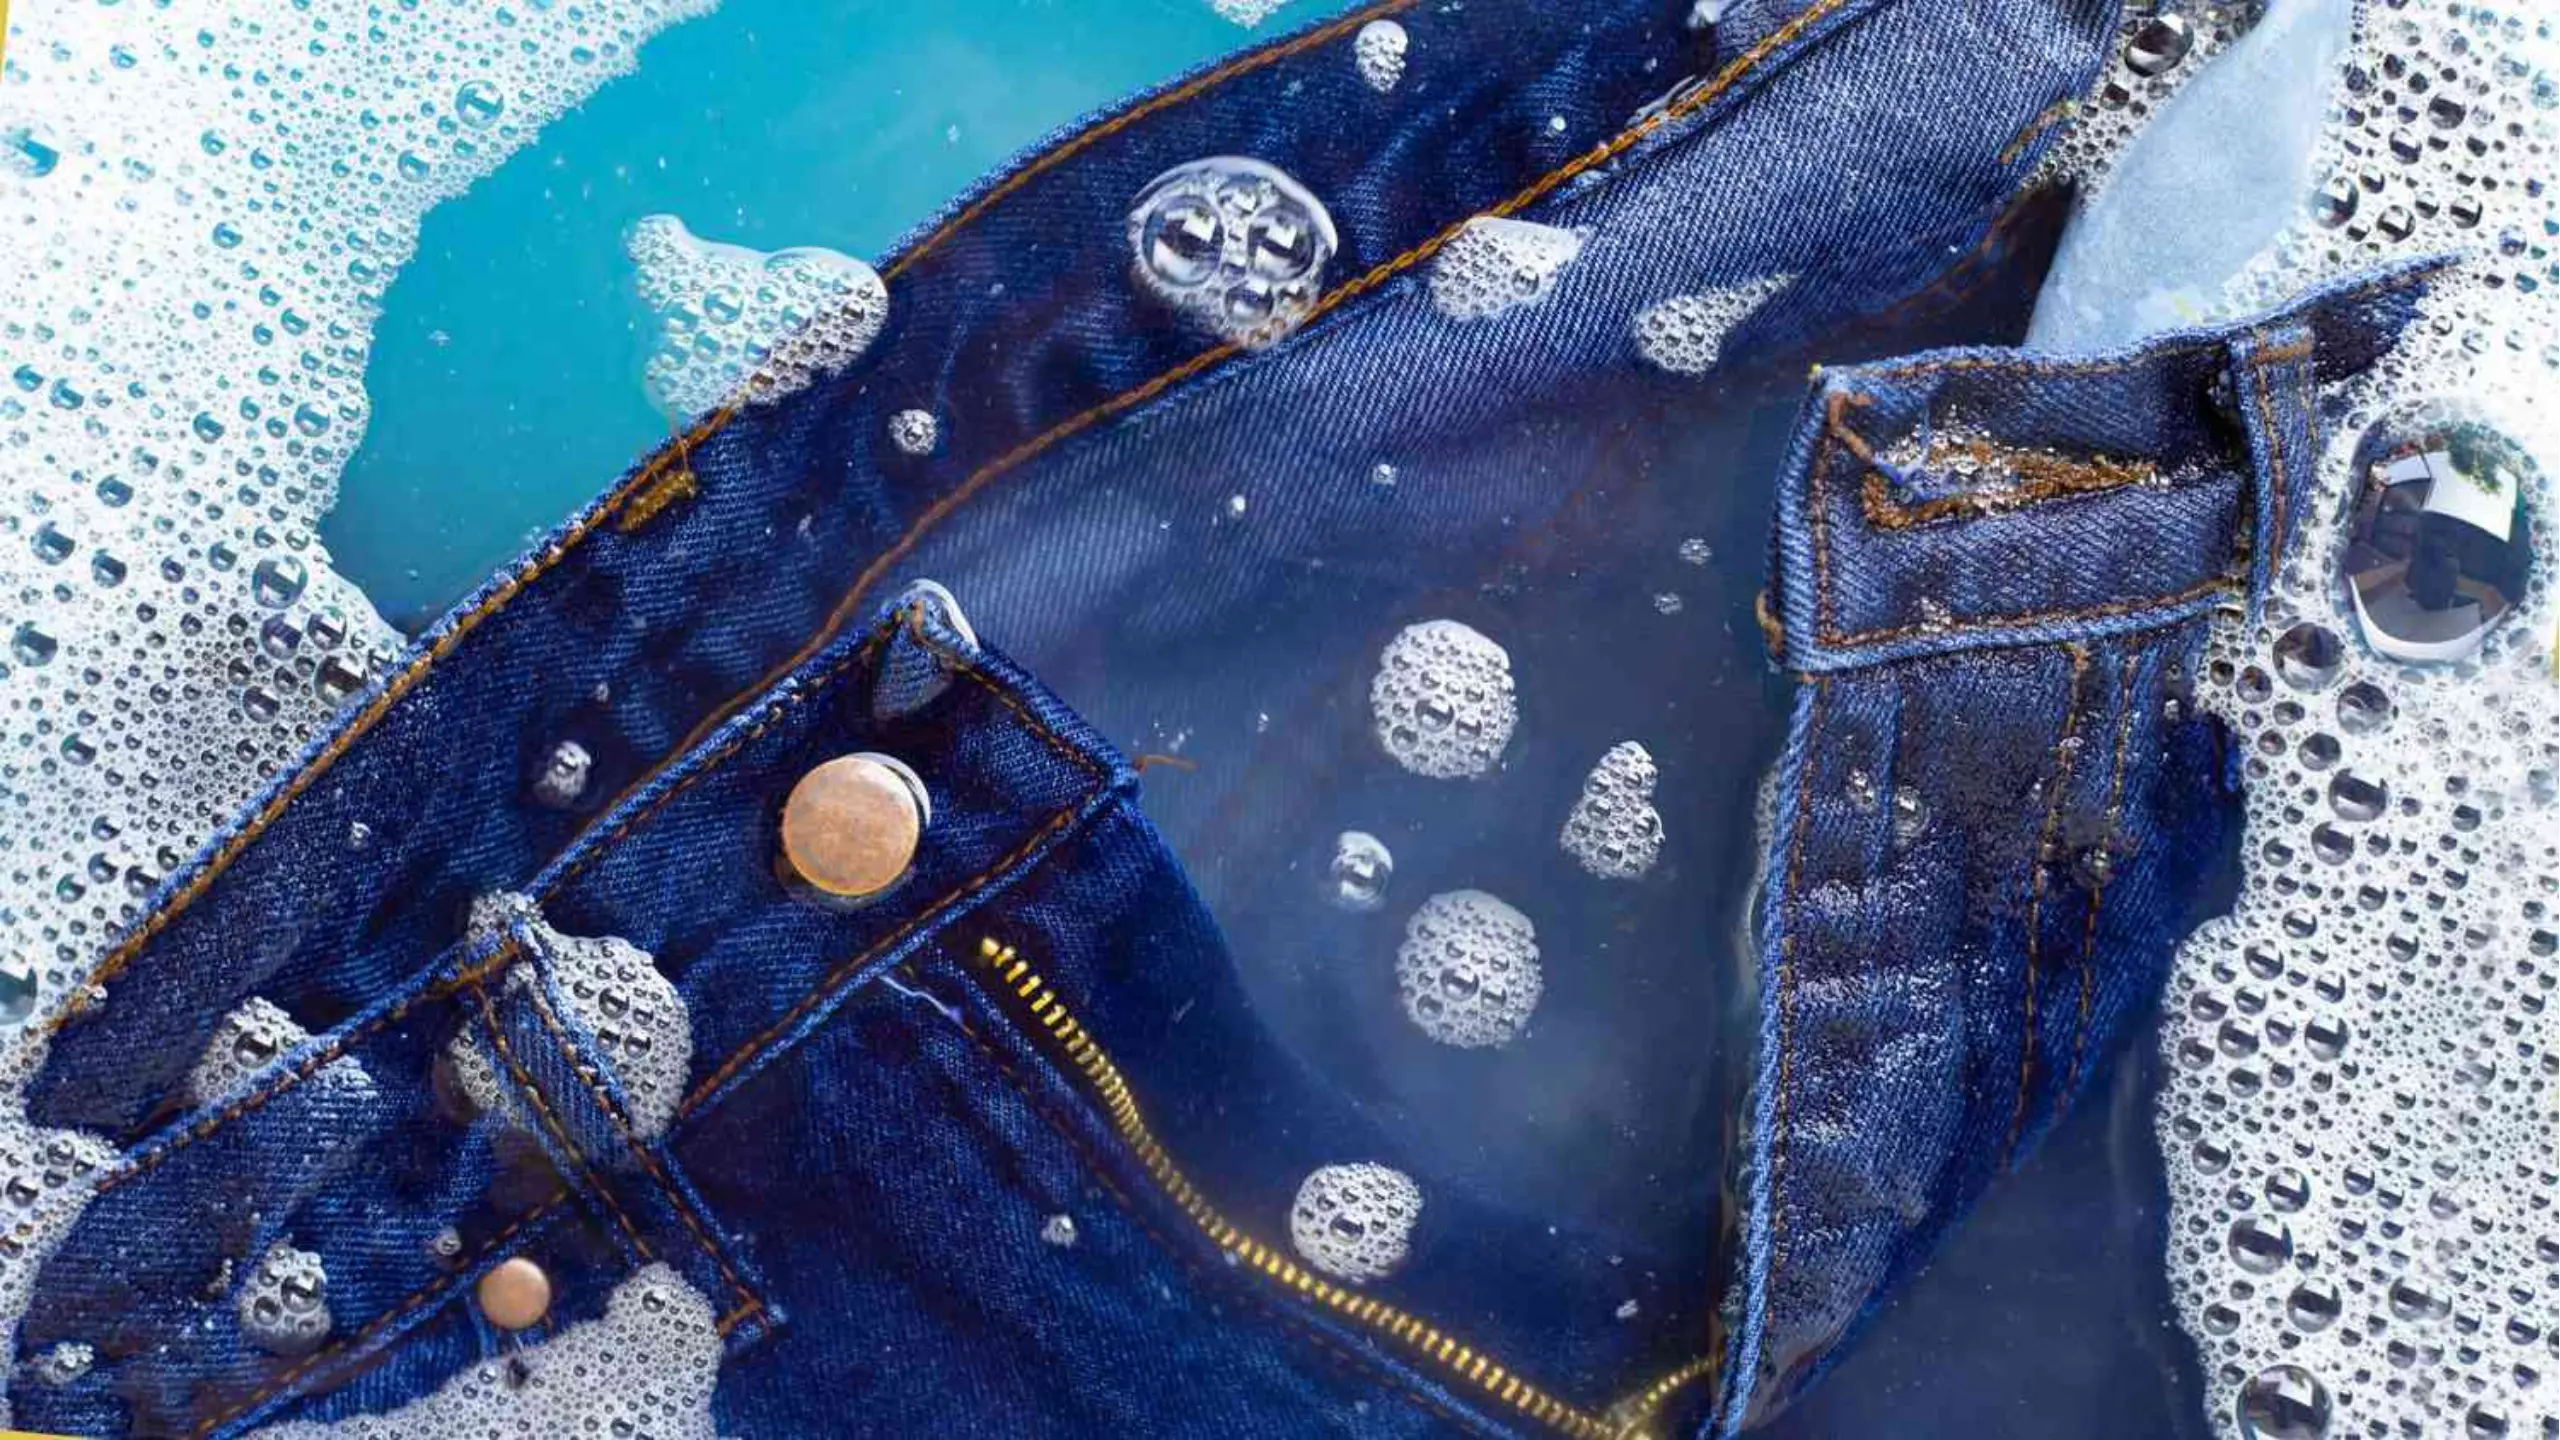 So how often should you wash your jeans Here are some tips from laundry experts and fashion stylists.